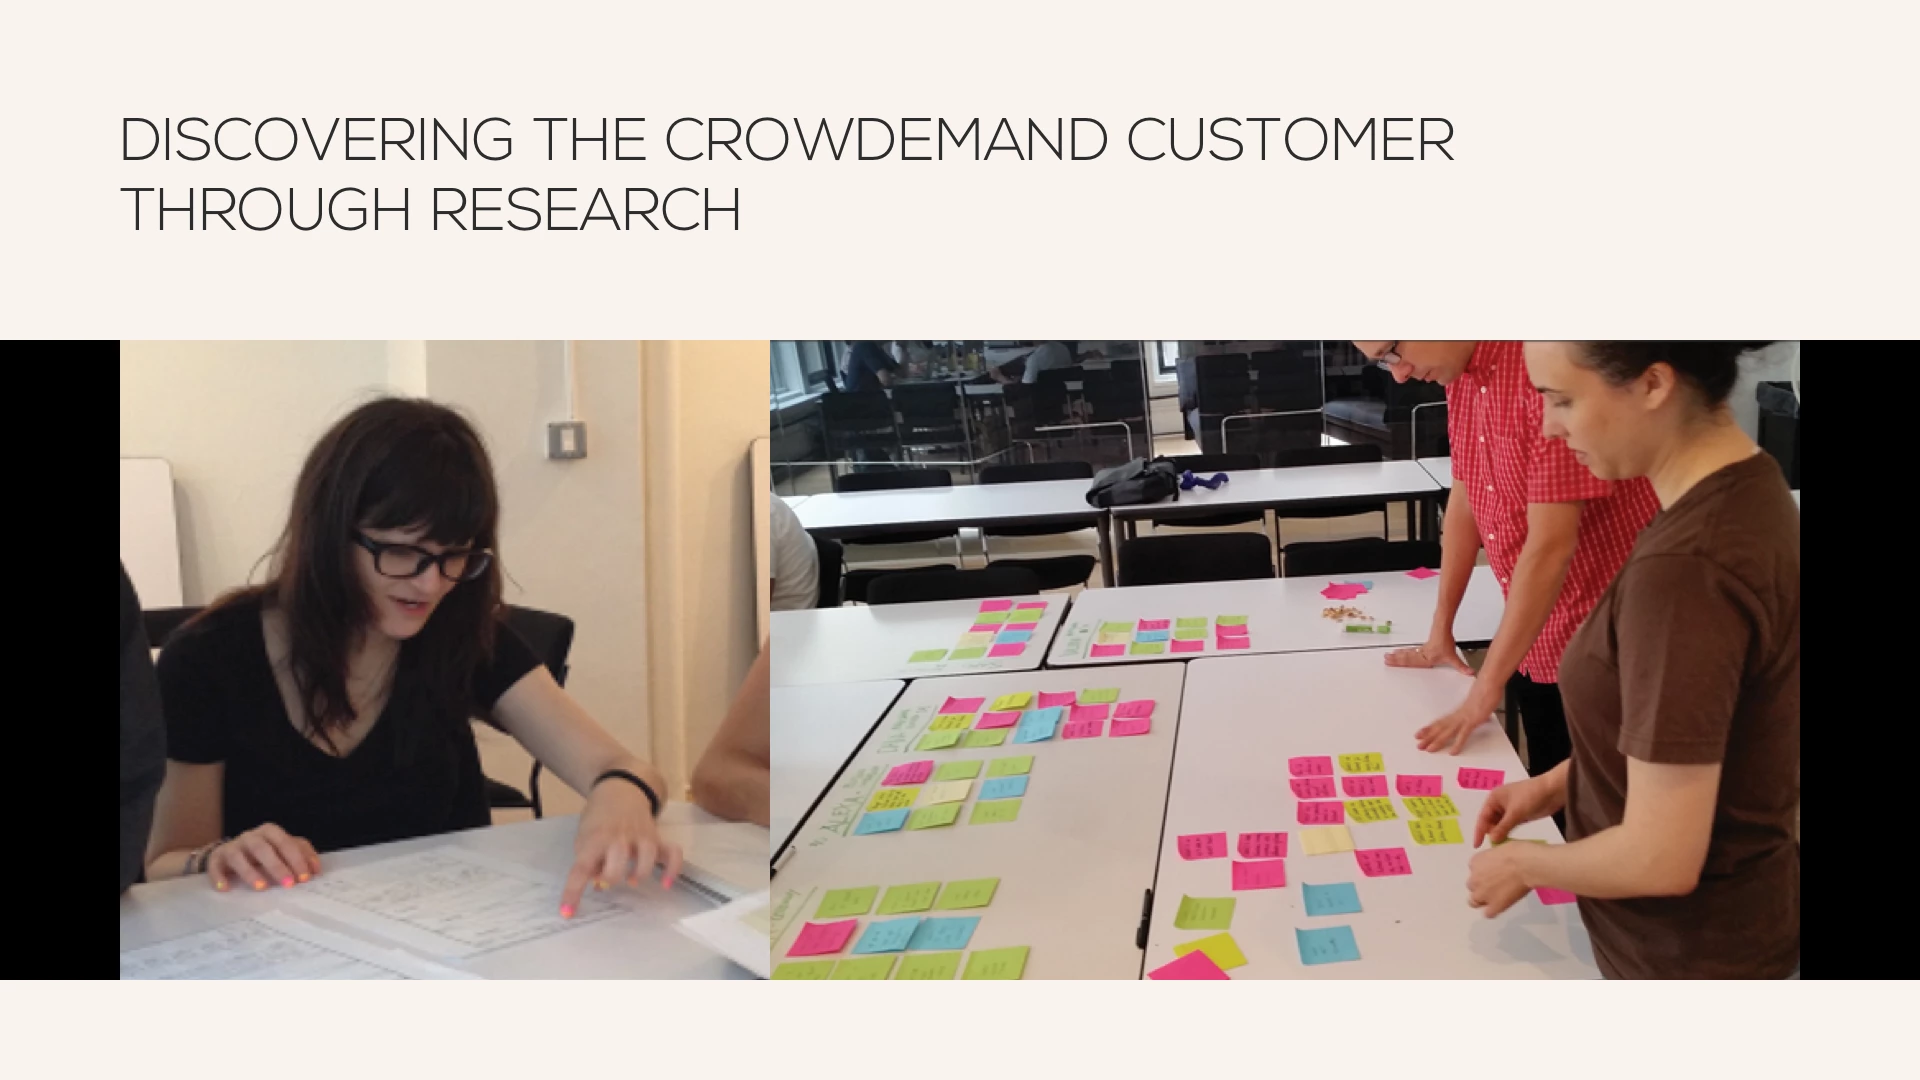 View of Discovering Crowdemand customers through research